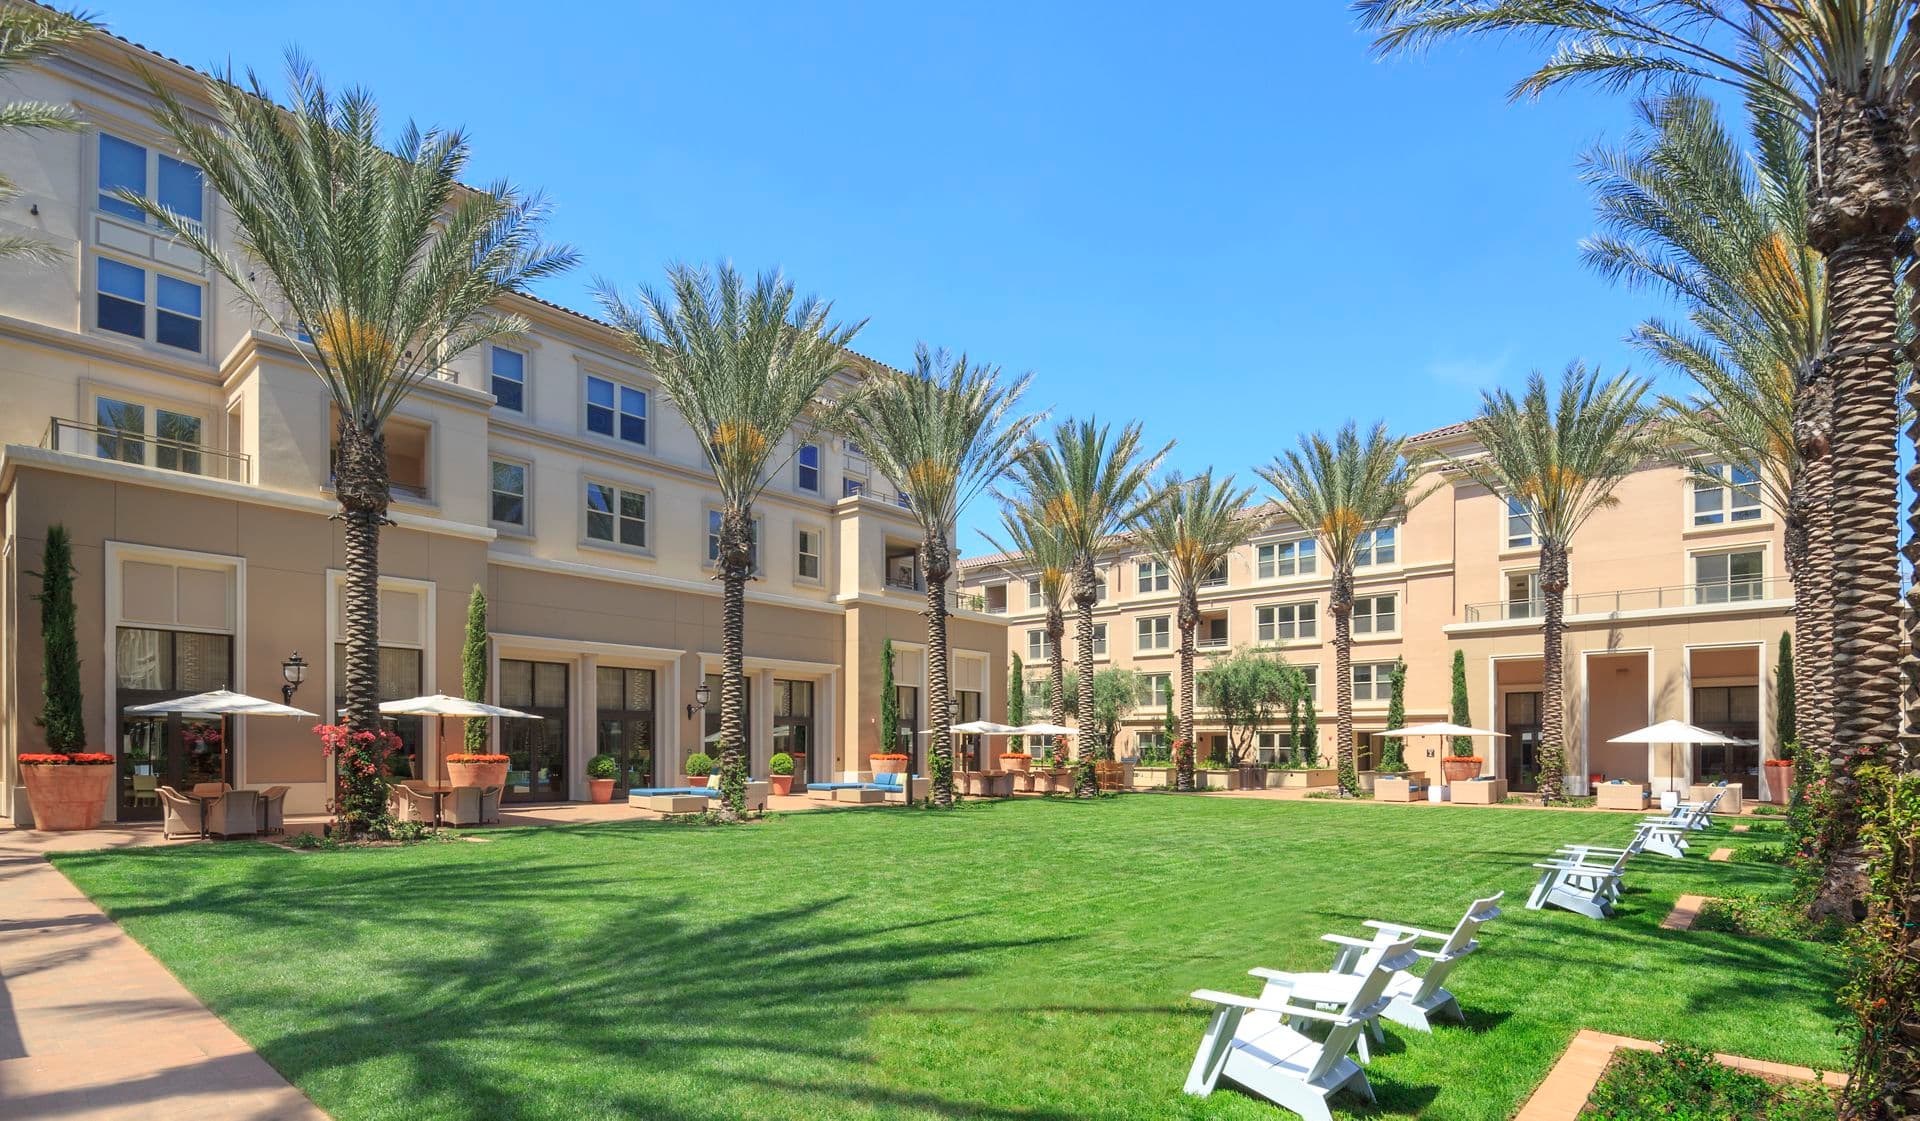 Exterior view of lawn and lounge area at Villas Fashion Island Apartment Homes in Newport Beach, CA.